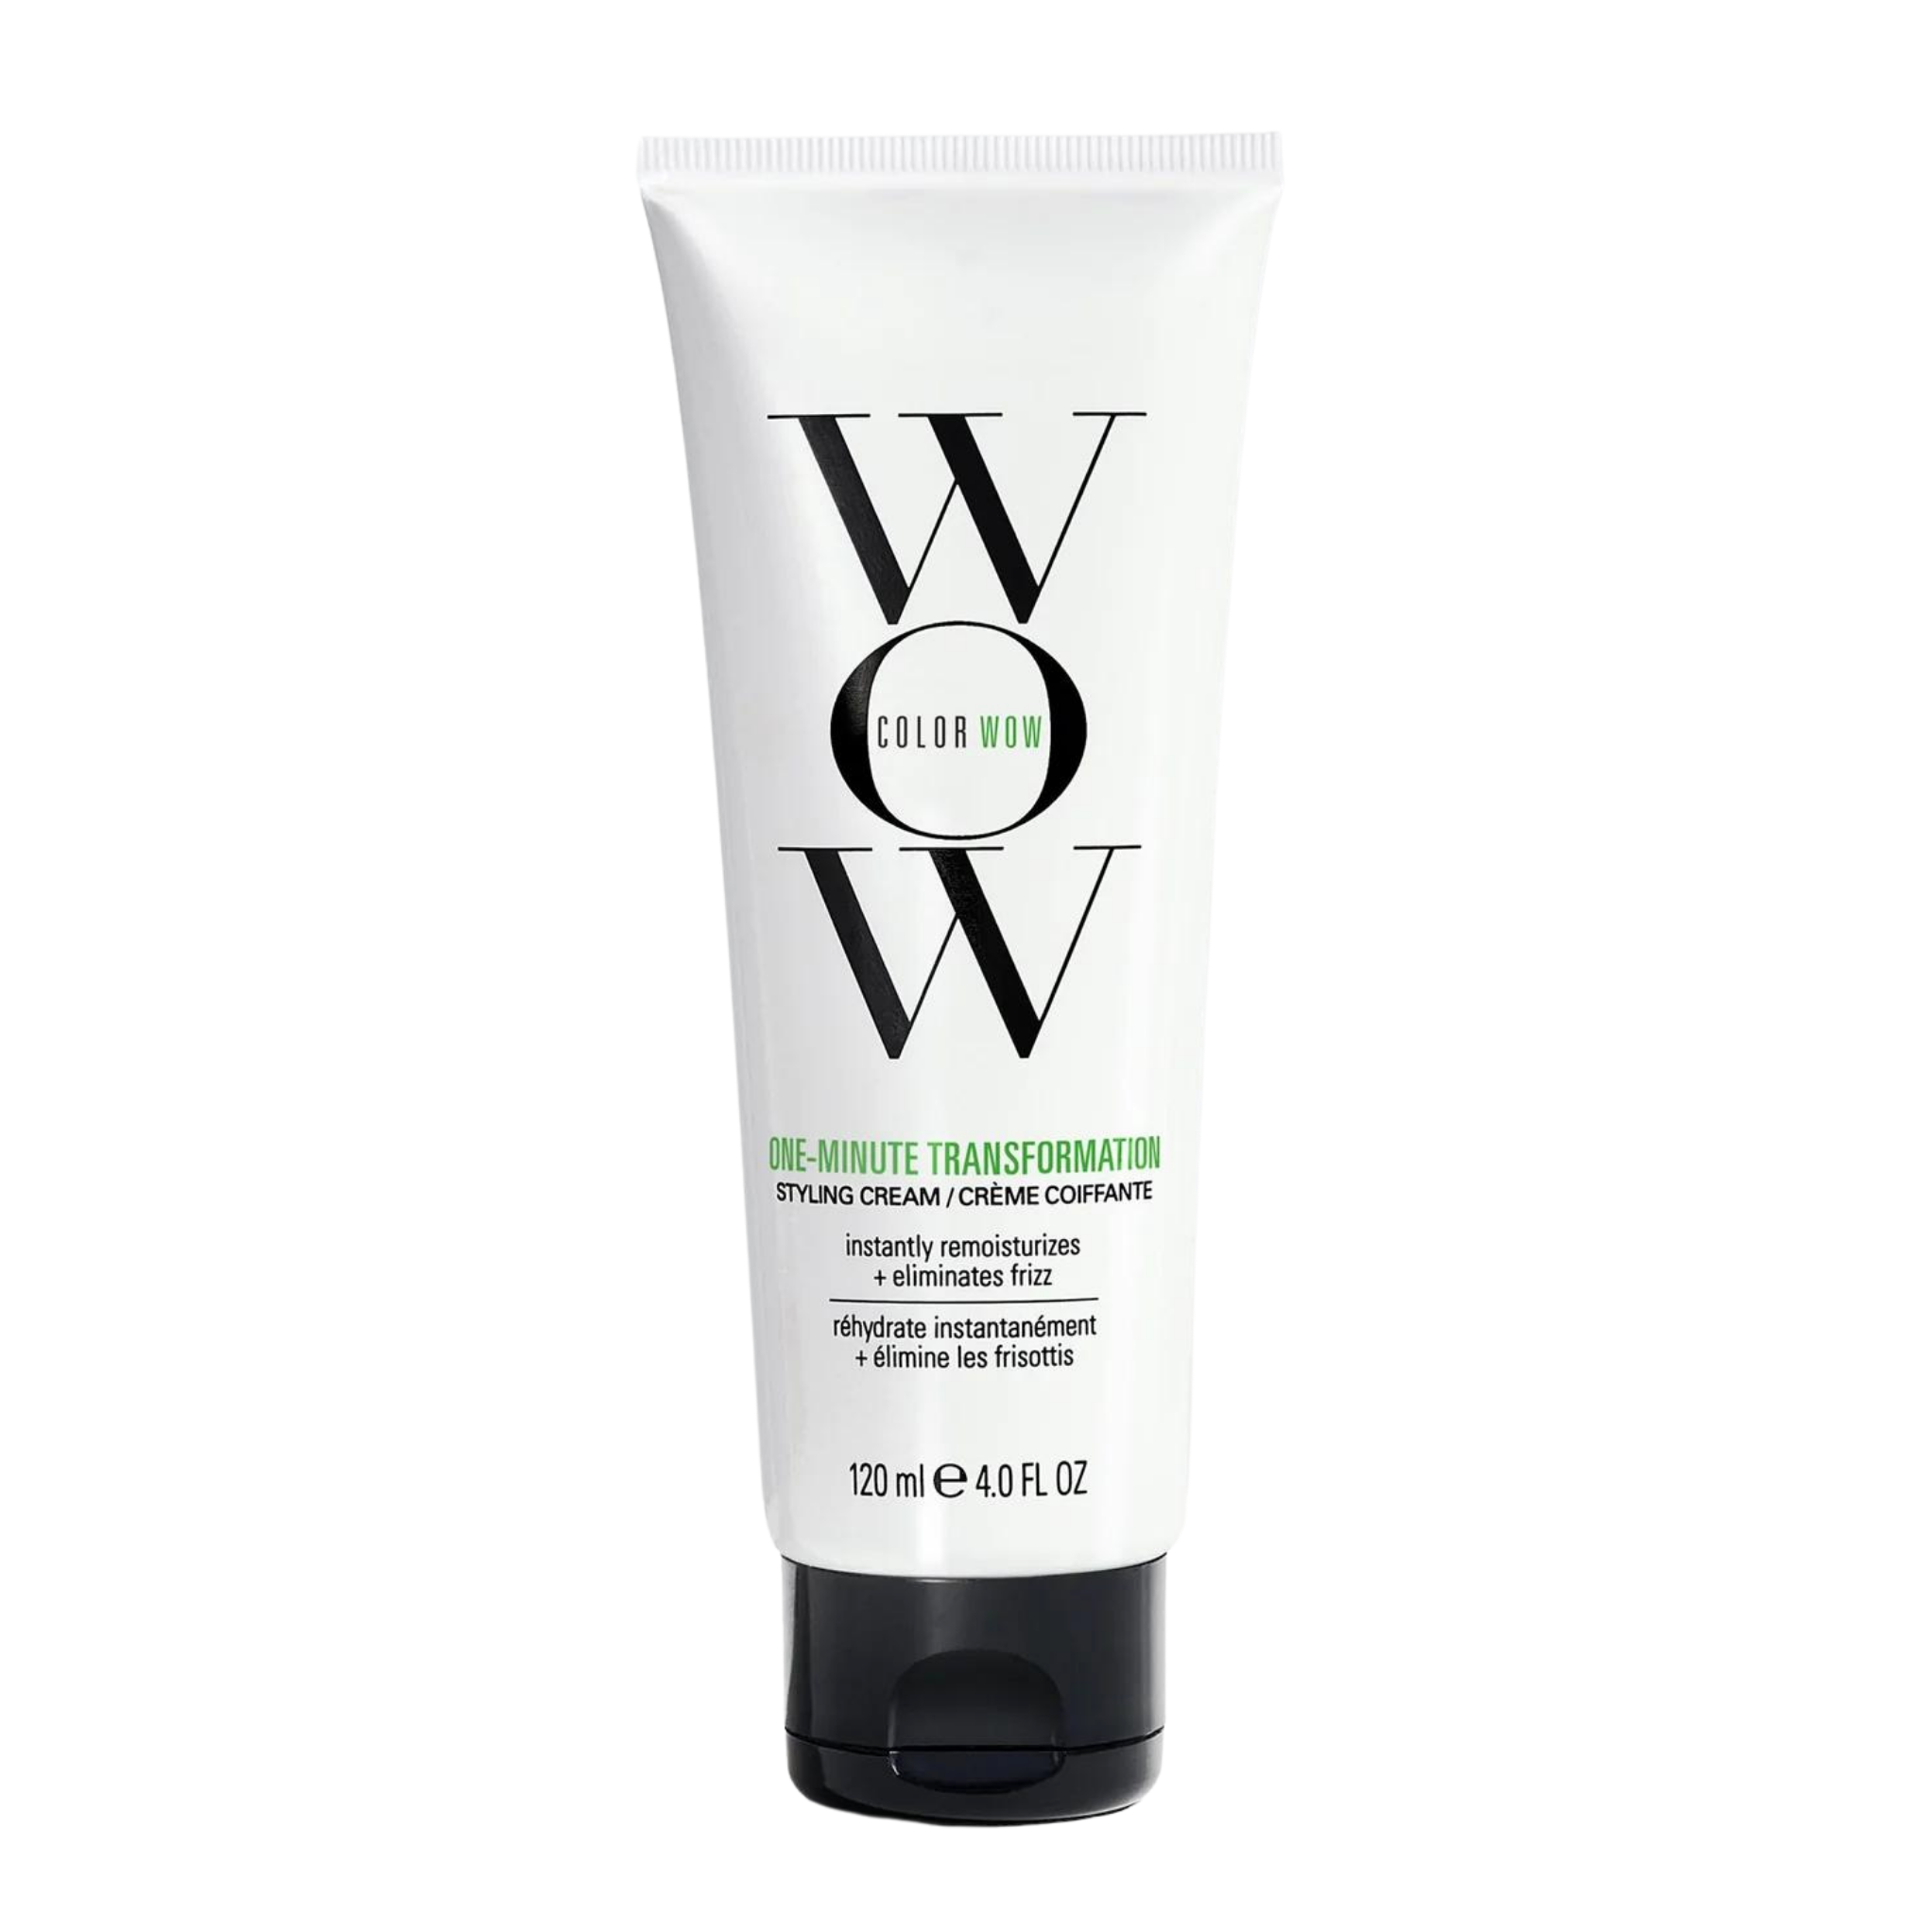 Color Wow One-Minute Transformation Styling Cream 